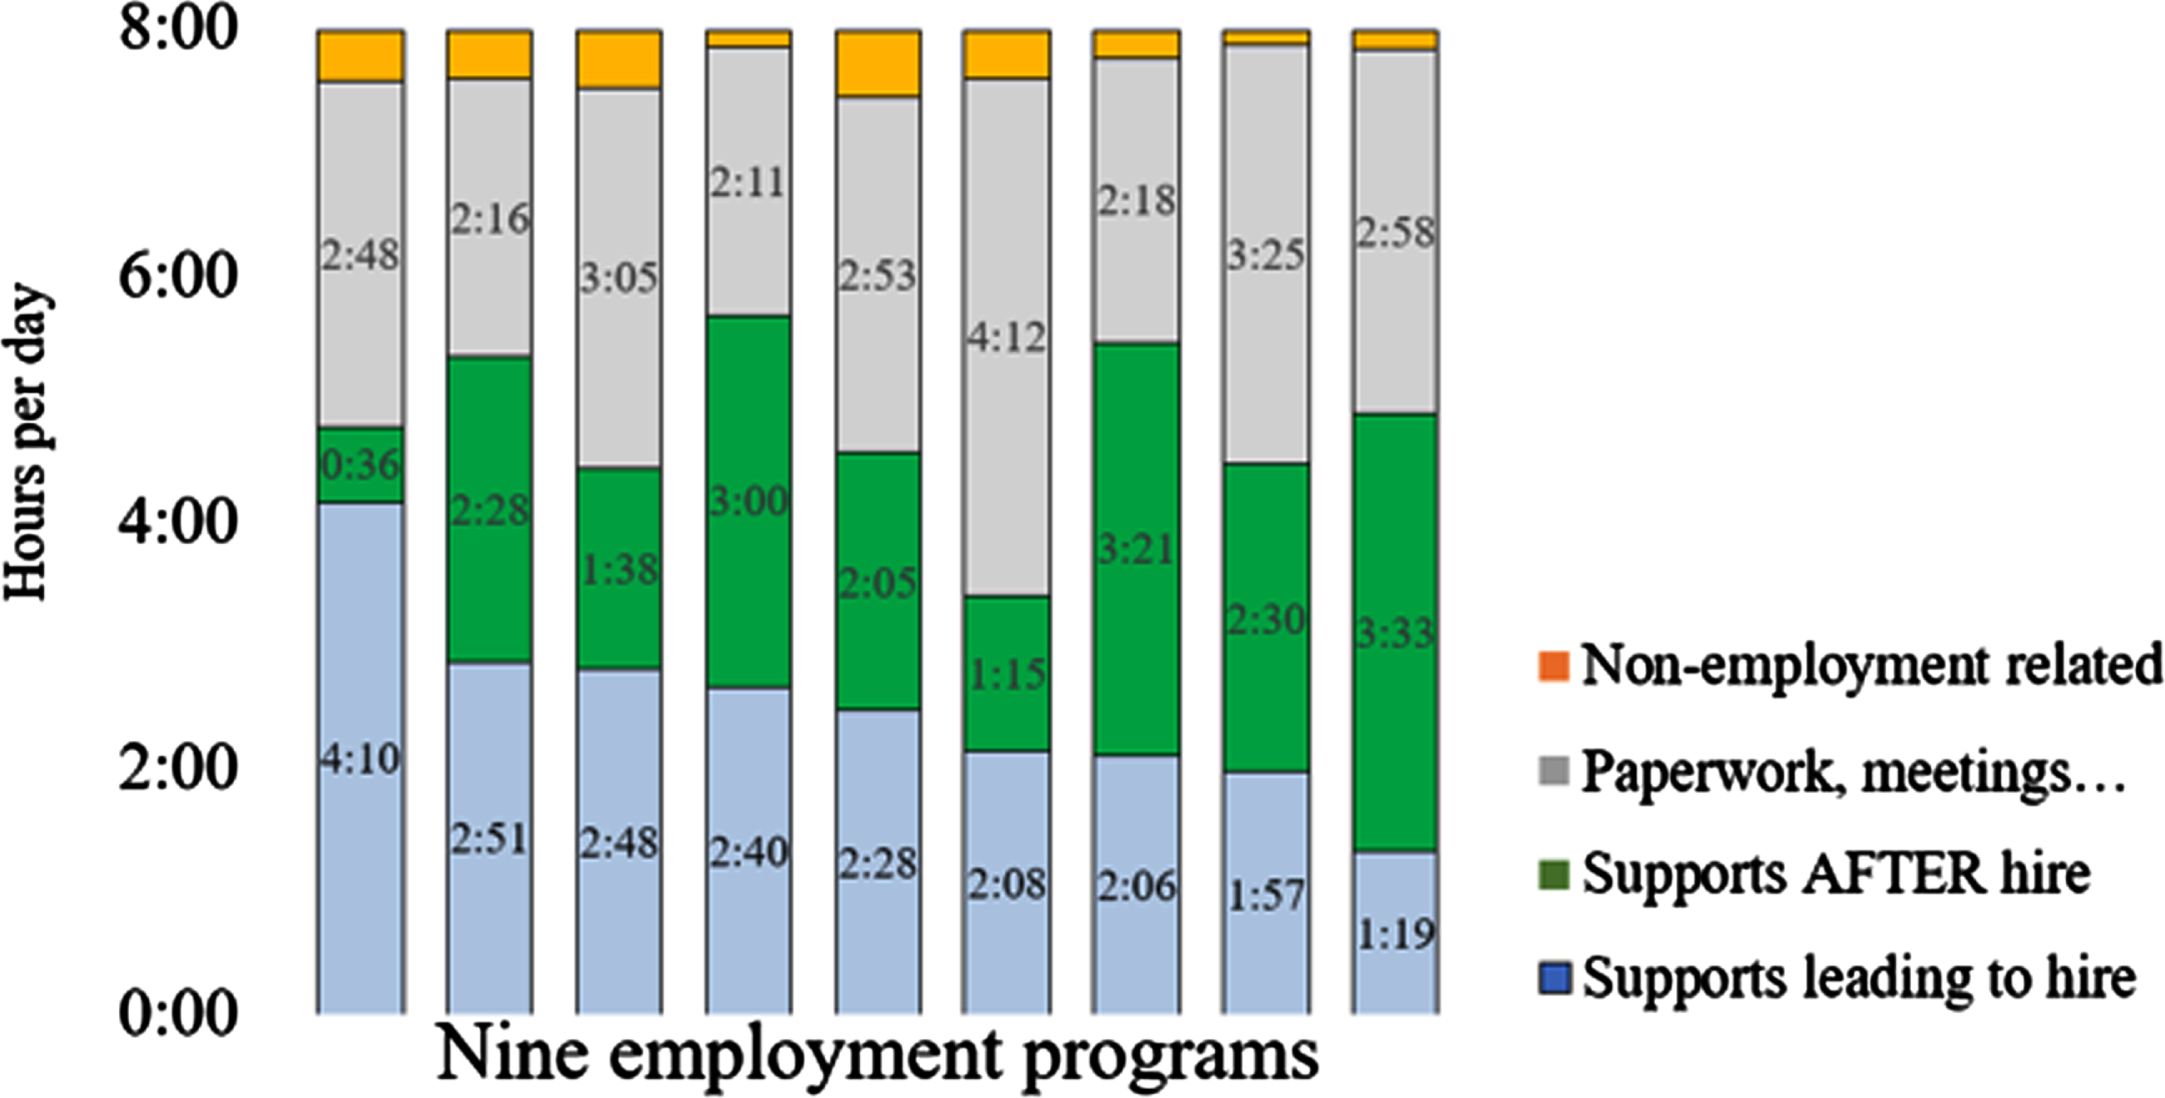 Estimated average hours/day invested across support activities. A 9-bar chart shows the distribution of time investment of each of the nine employment programs across supports leading to hire, supports after hire, paperwork/meetings, and non-employment related.